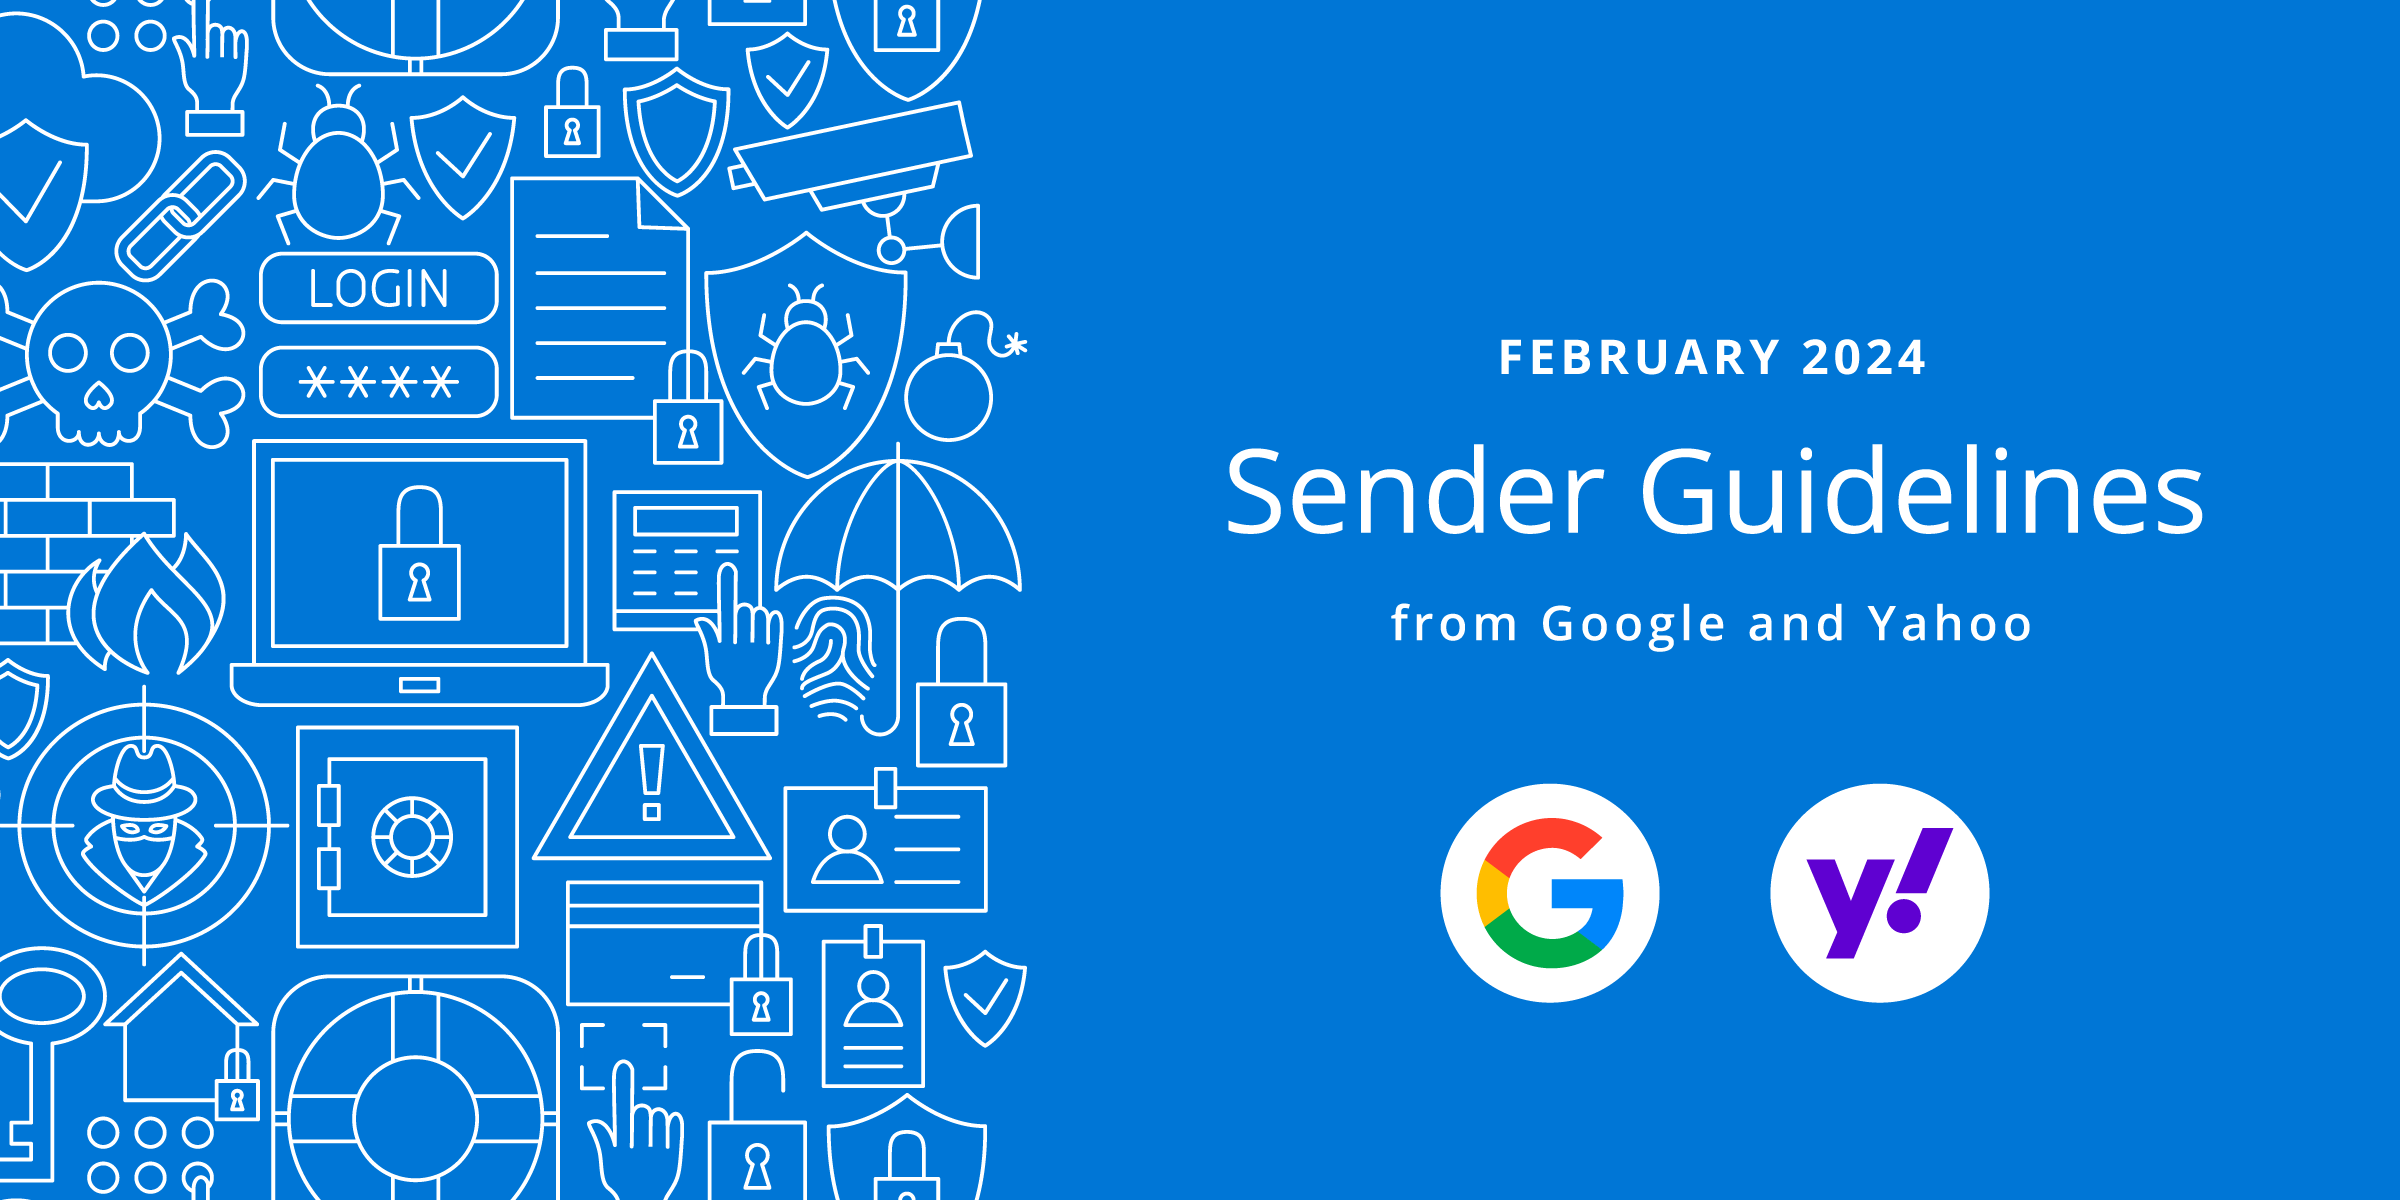 February 2024 sender guidelines from Google and Yahoo